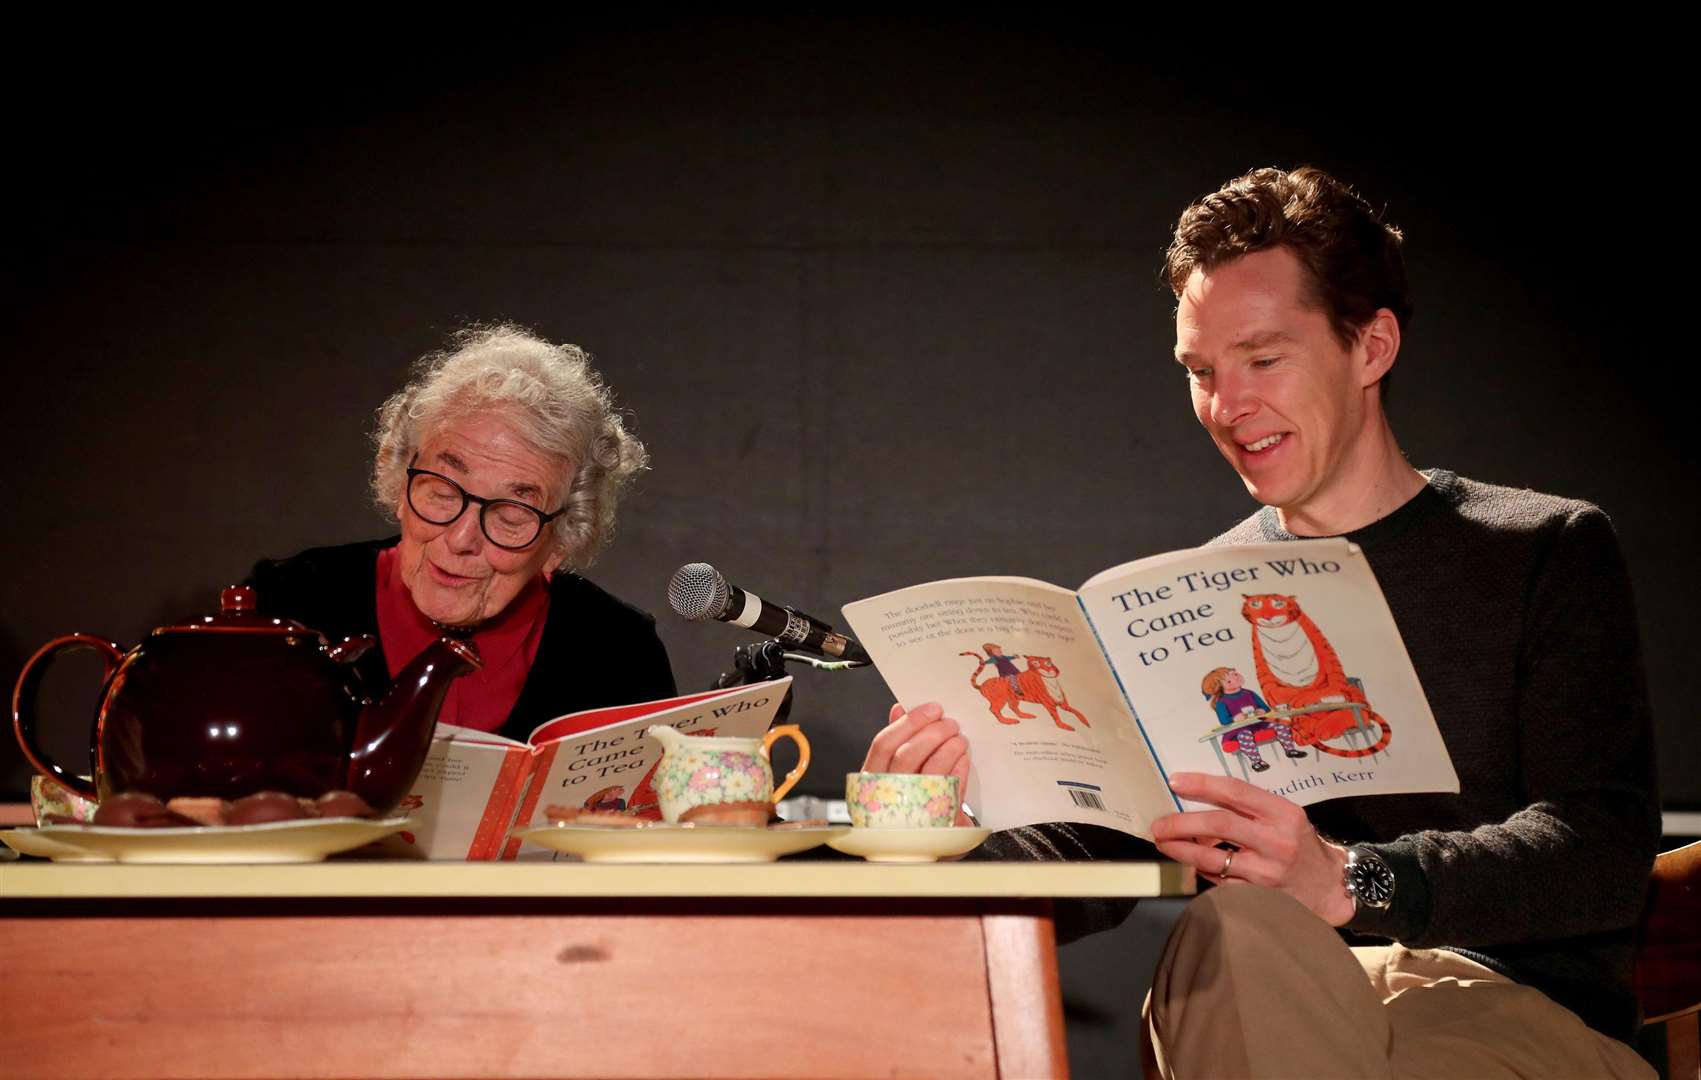 Judith Kerr with Benedict Cumberbatch at a reading of The Tiger Who Came To Tea